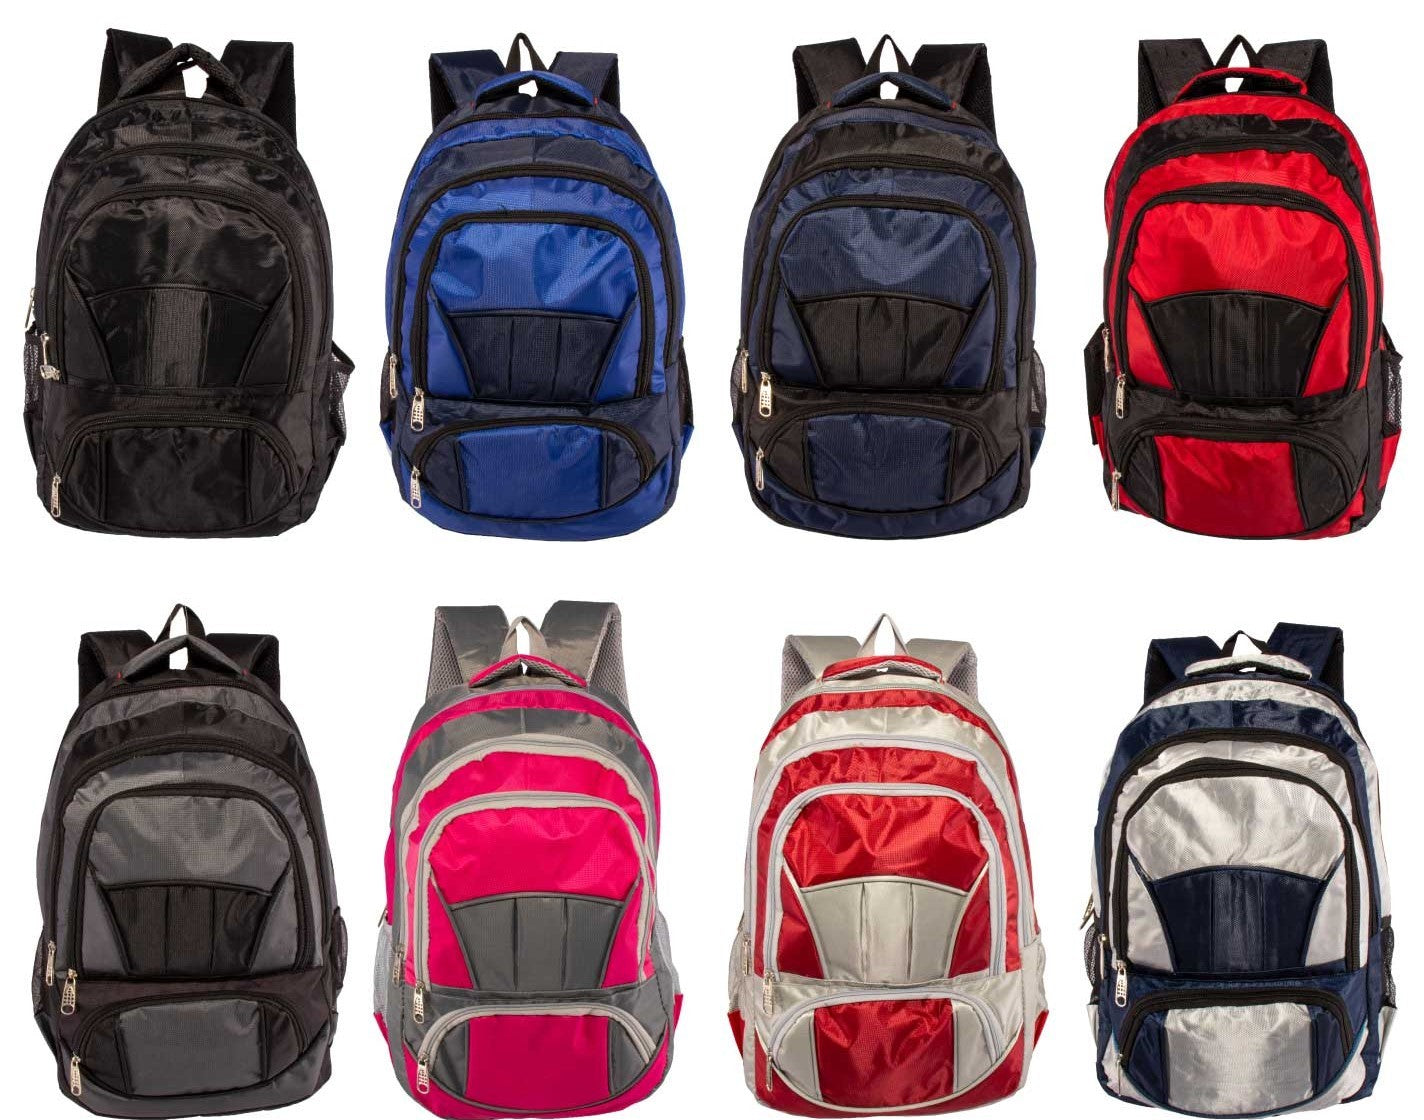 19" Premium Wholesale Backpack in 8 Assorted Colors - Bulk Case of 24